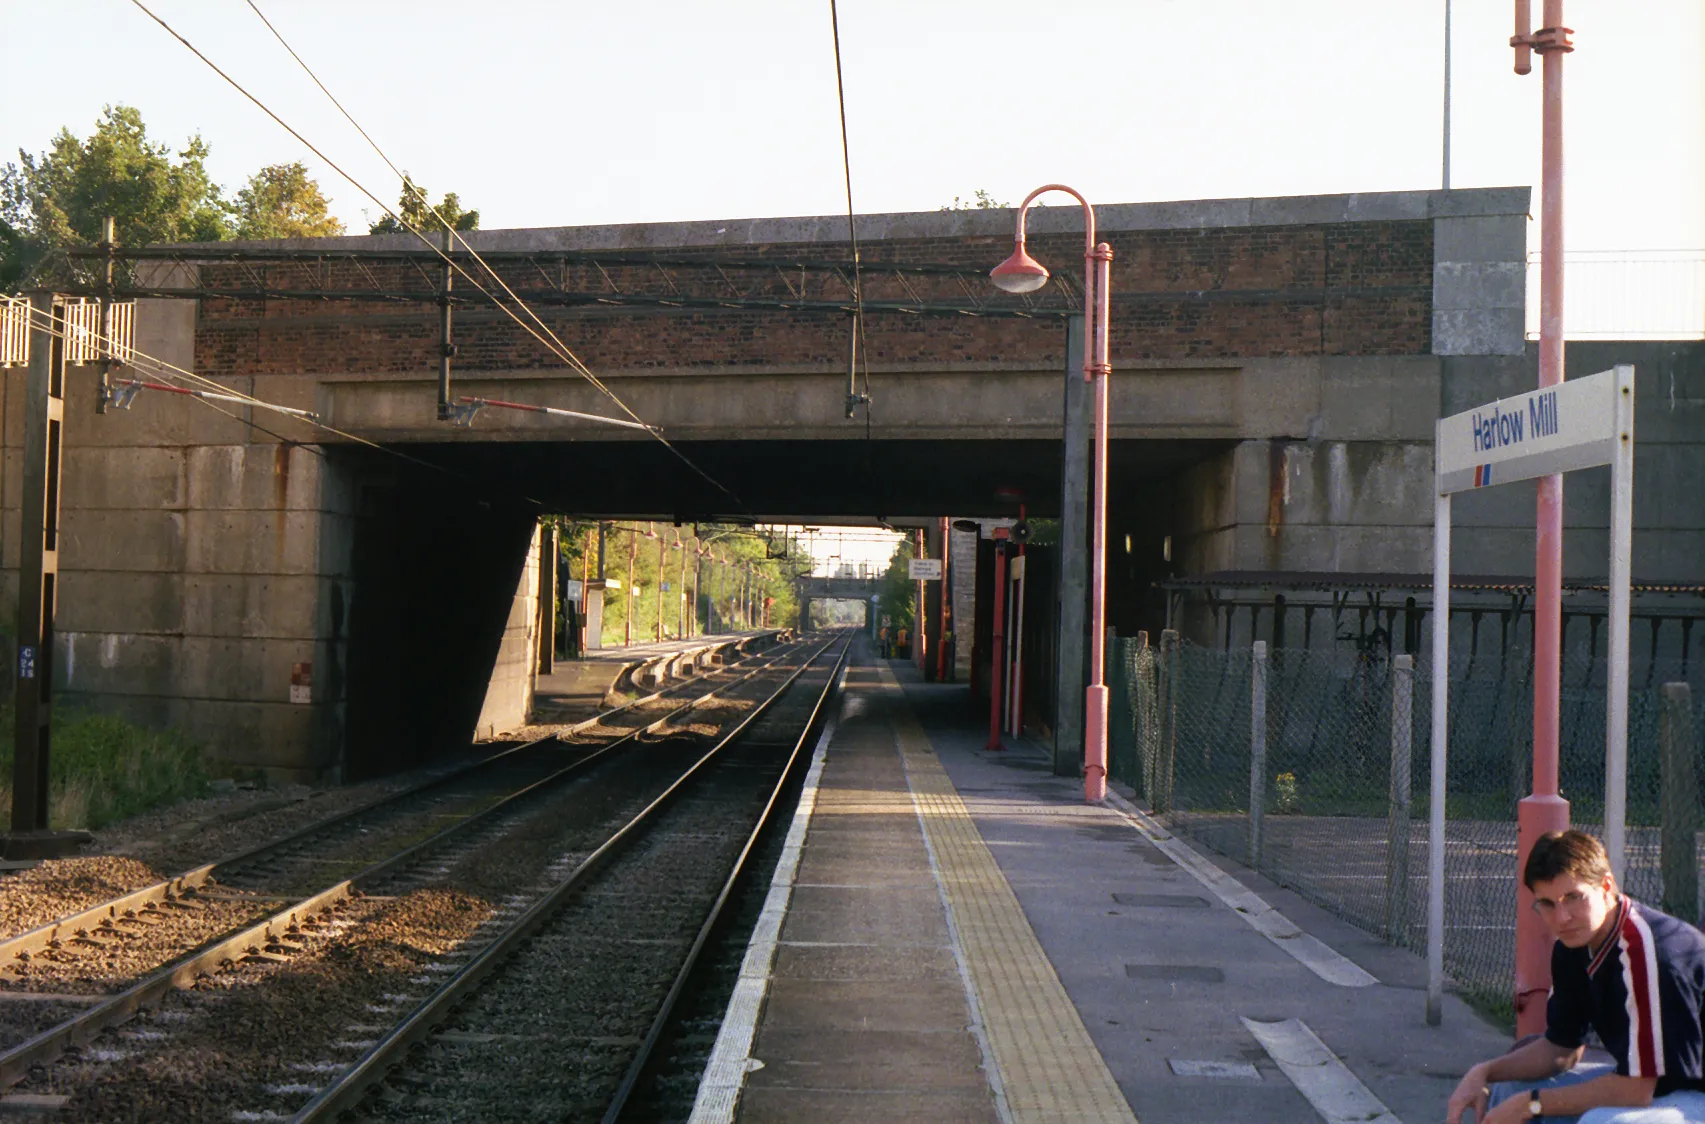 Photo showing: Railway station in Old Harlow, Essex, England